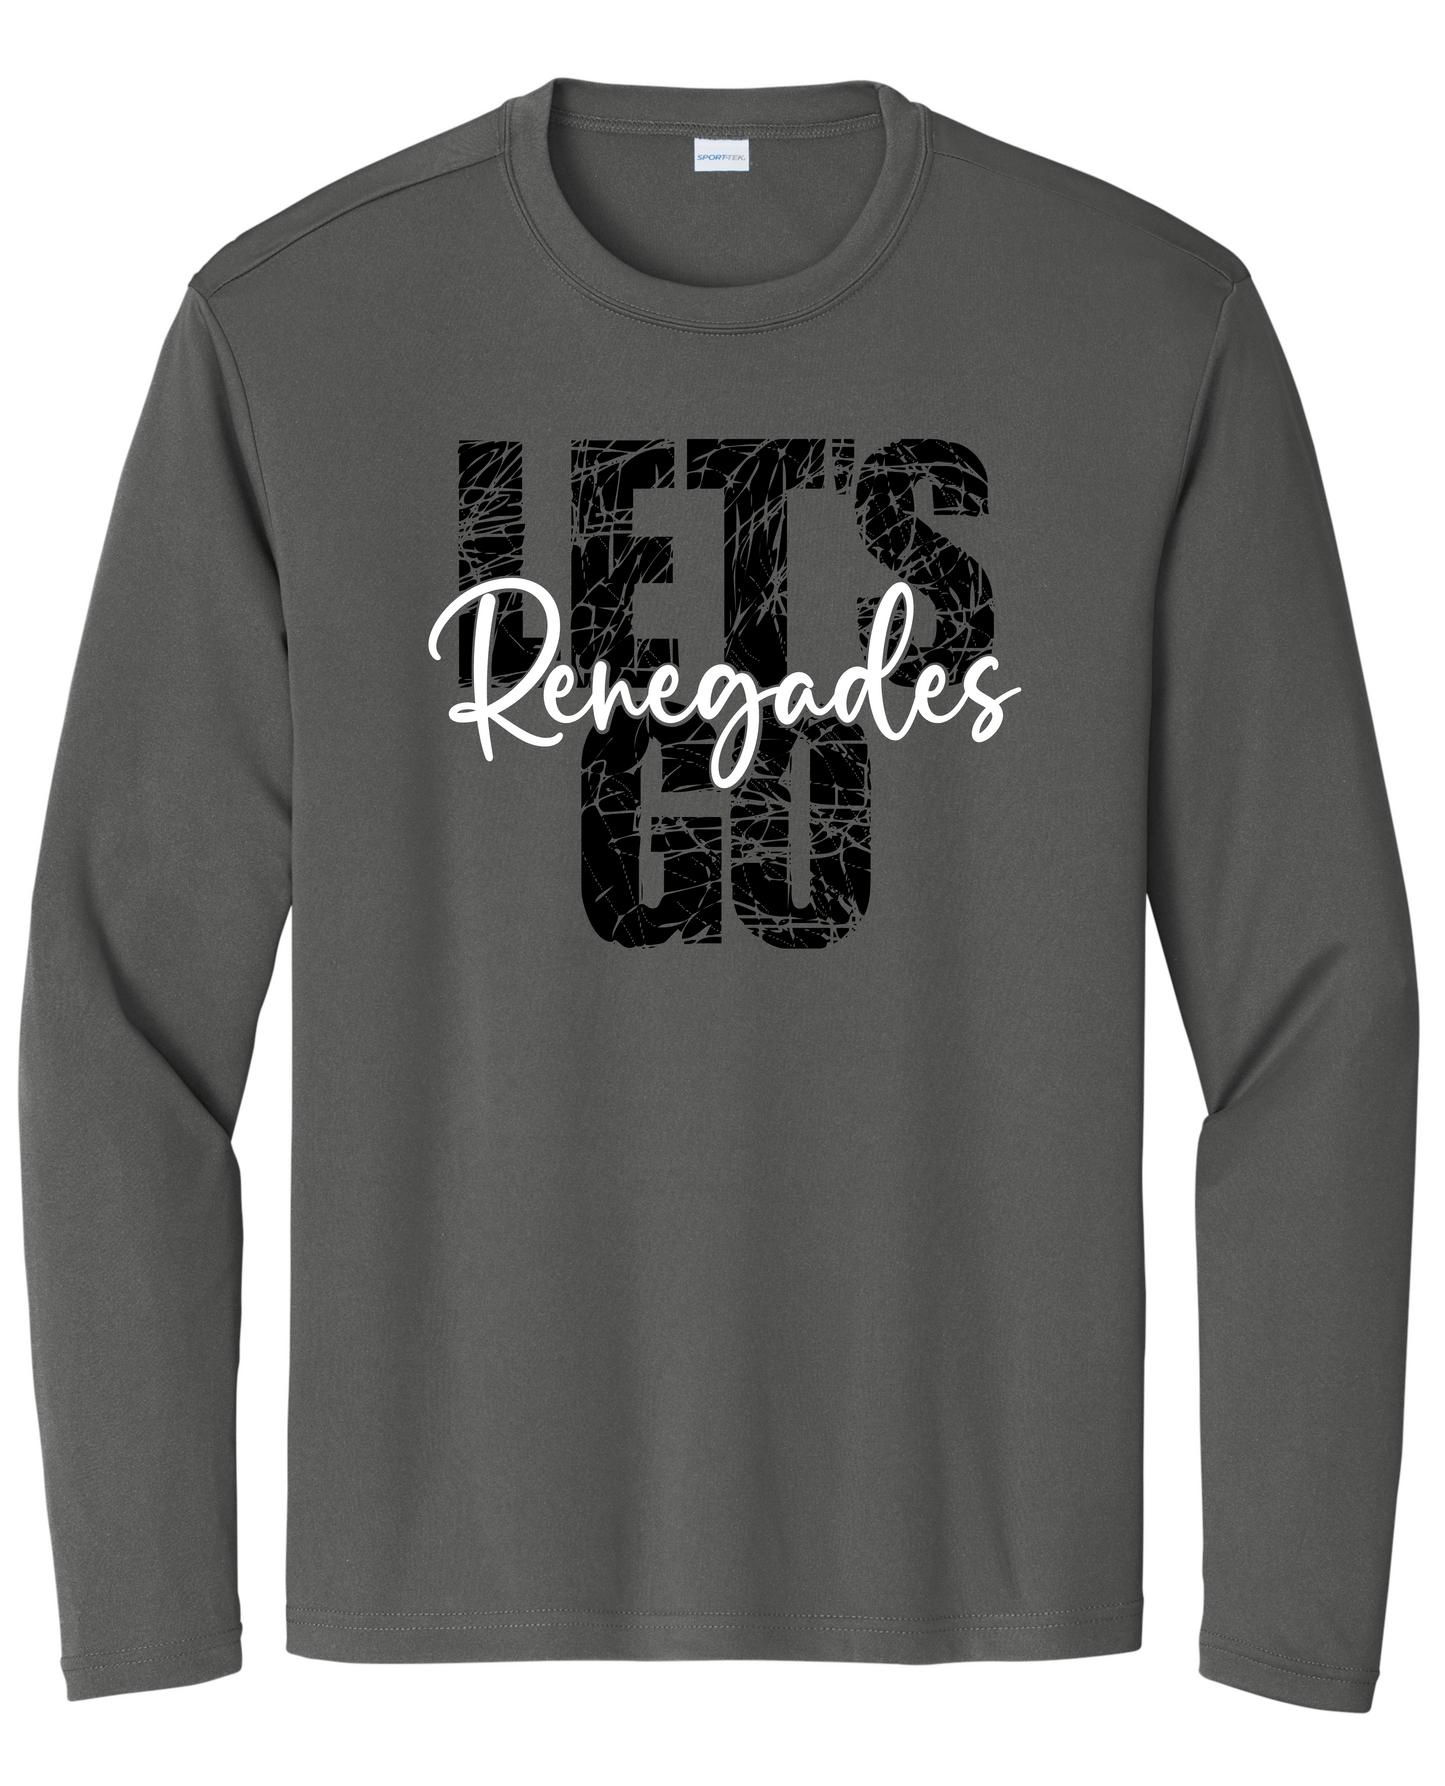 Let's Go Renegades Long Sleeve Dri-Fit - Charcoal